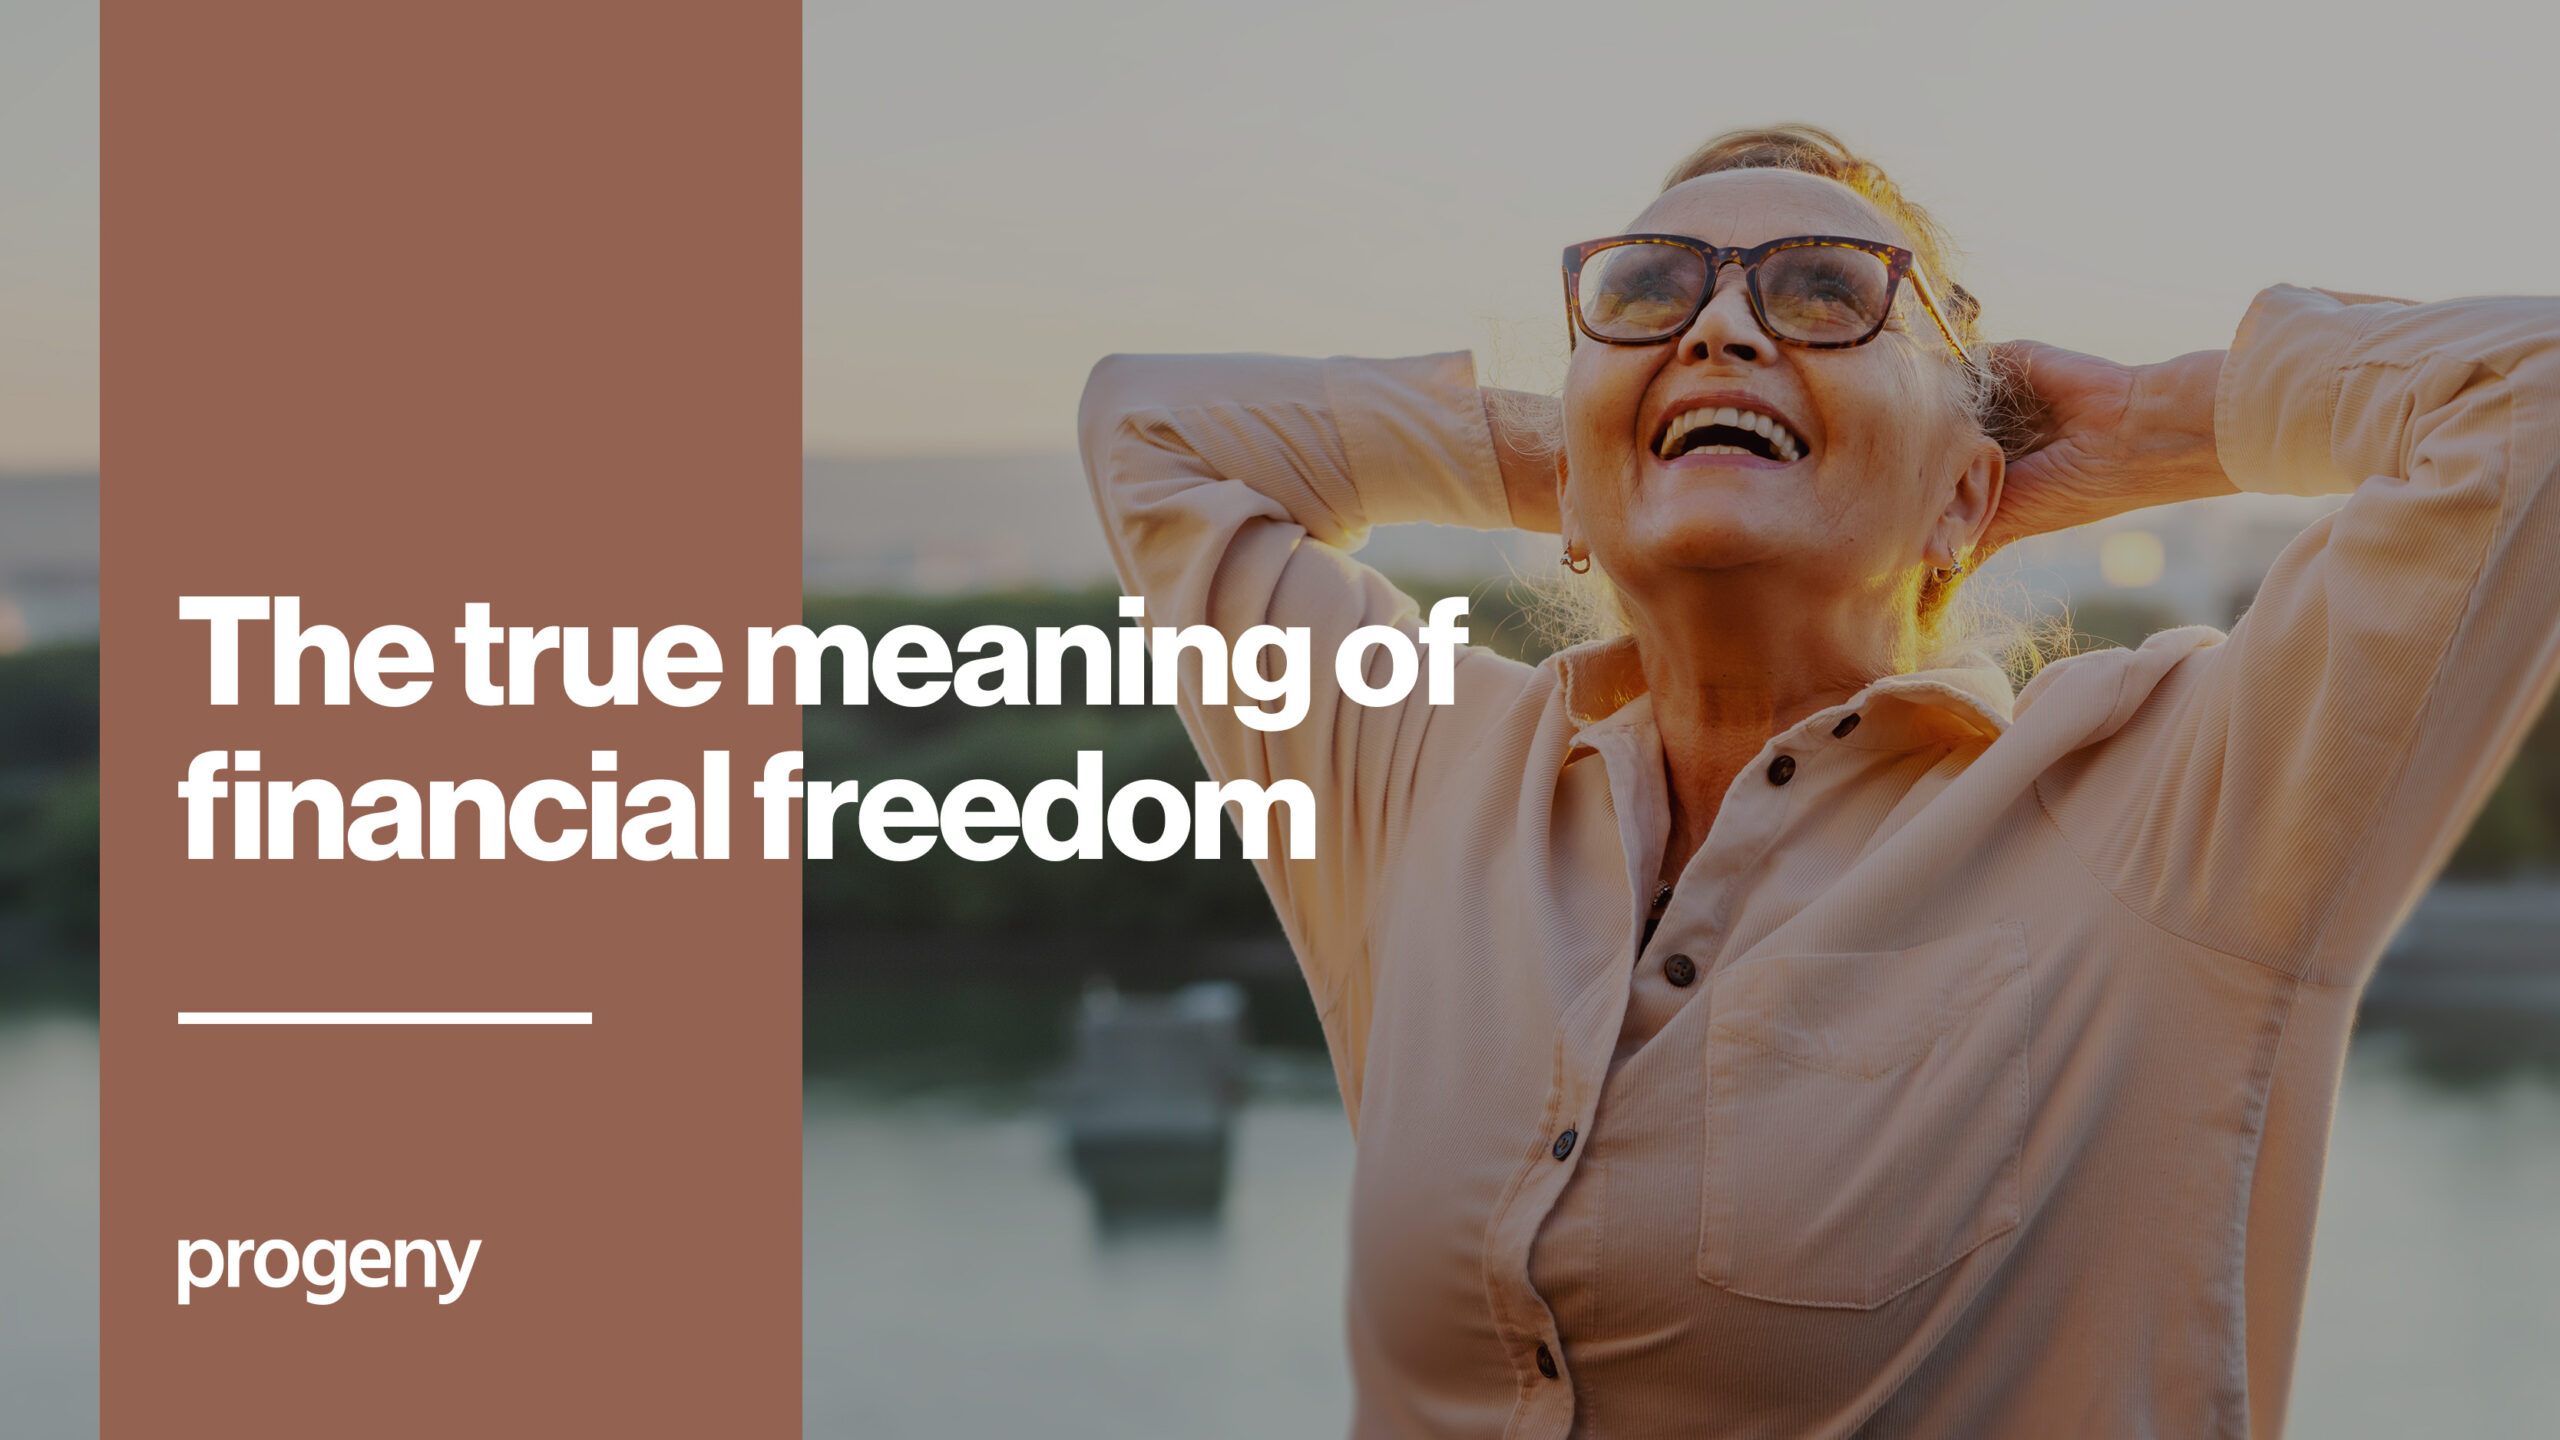 The true meaning of financial freedom